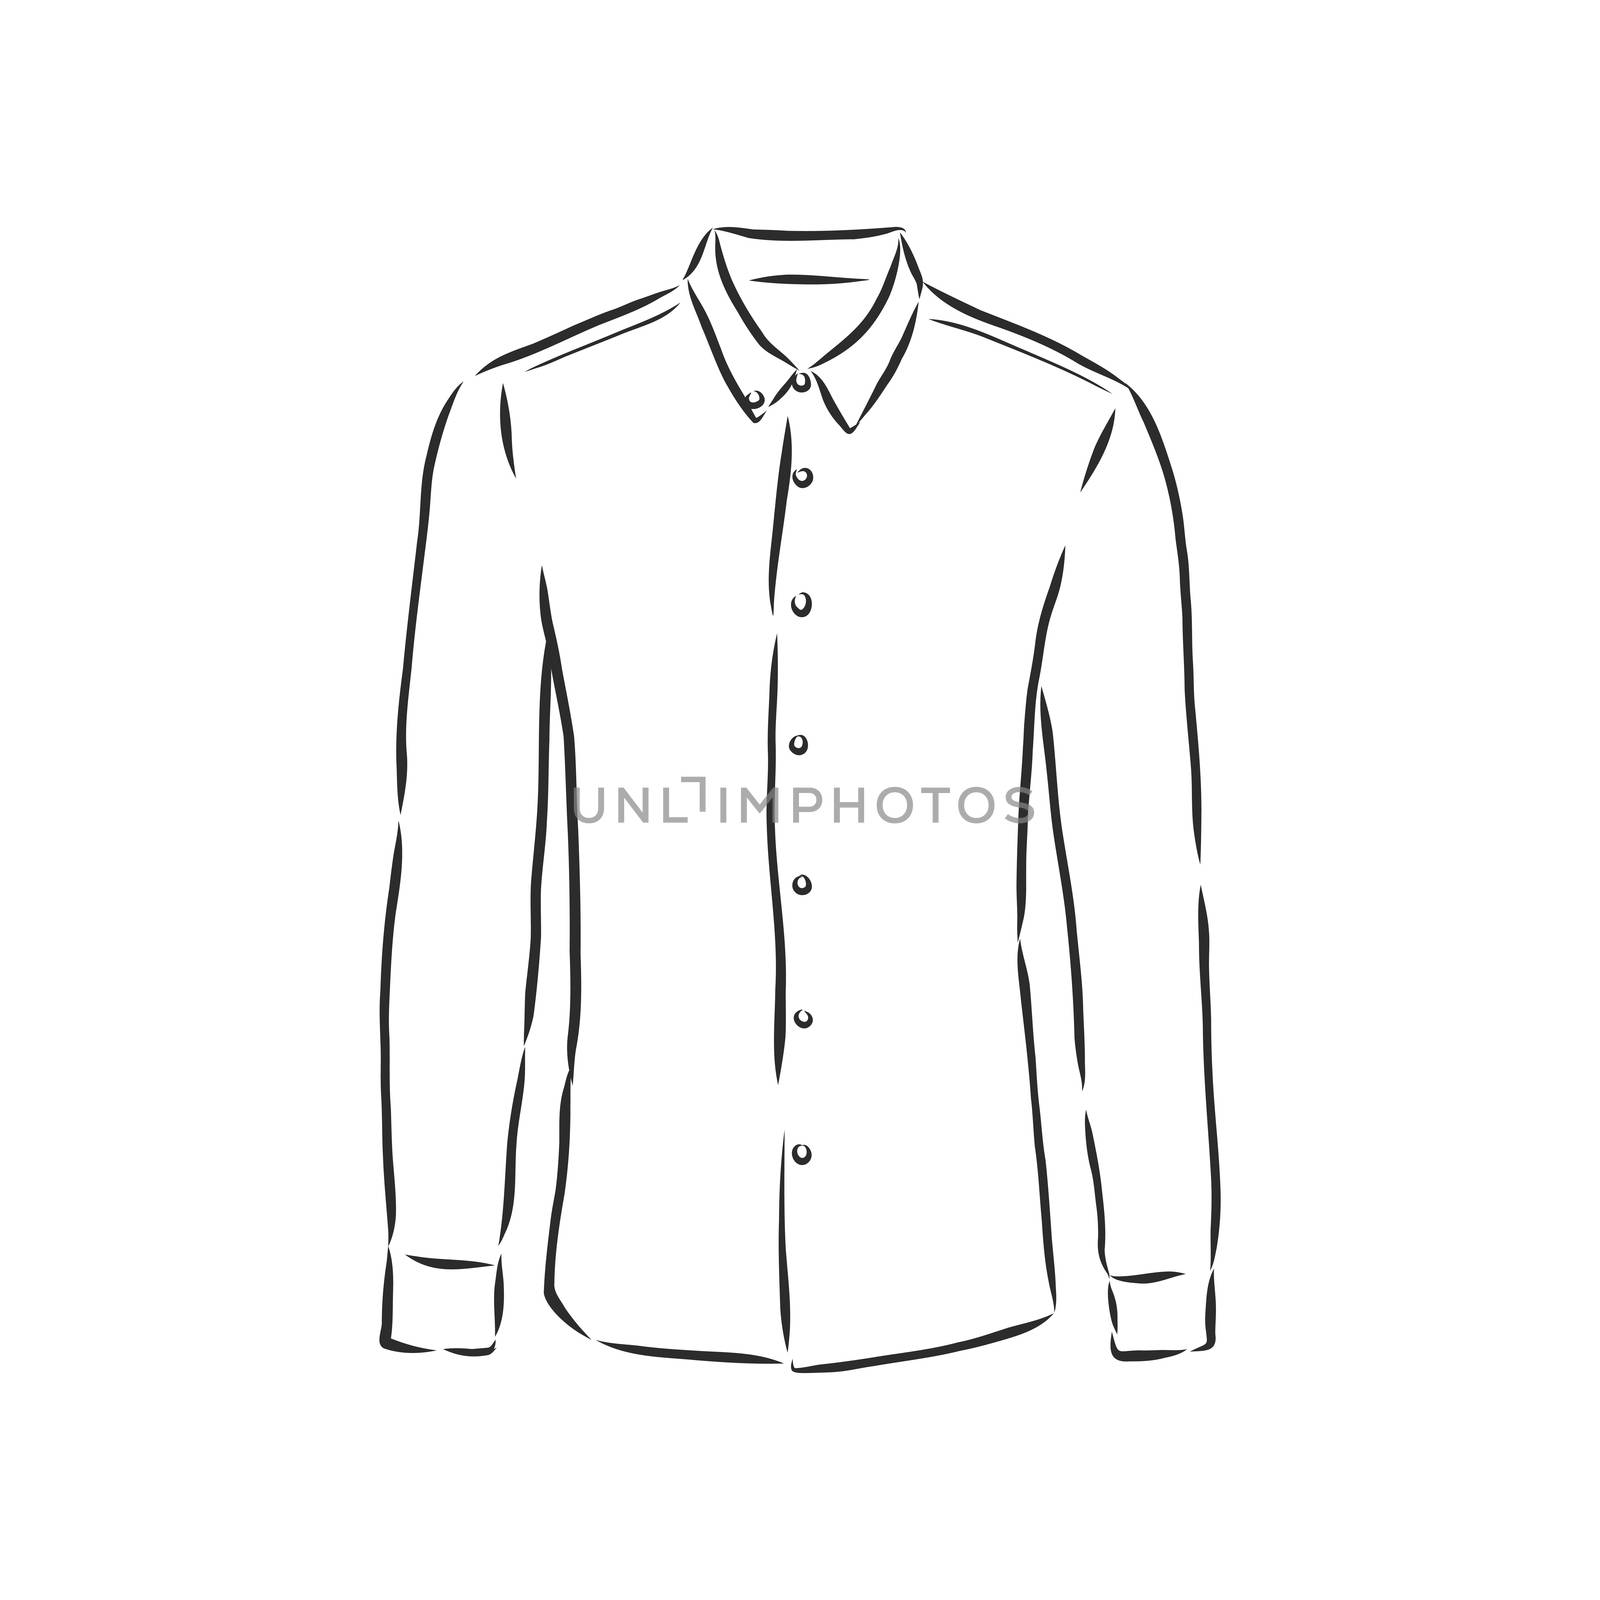 Vector illustration of man's shirt. Front view